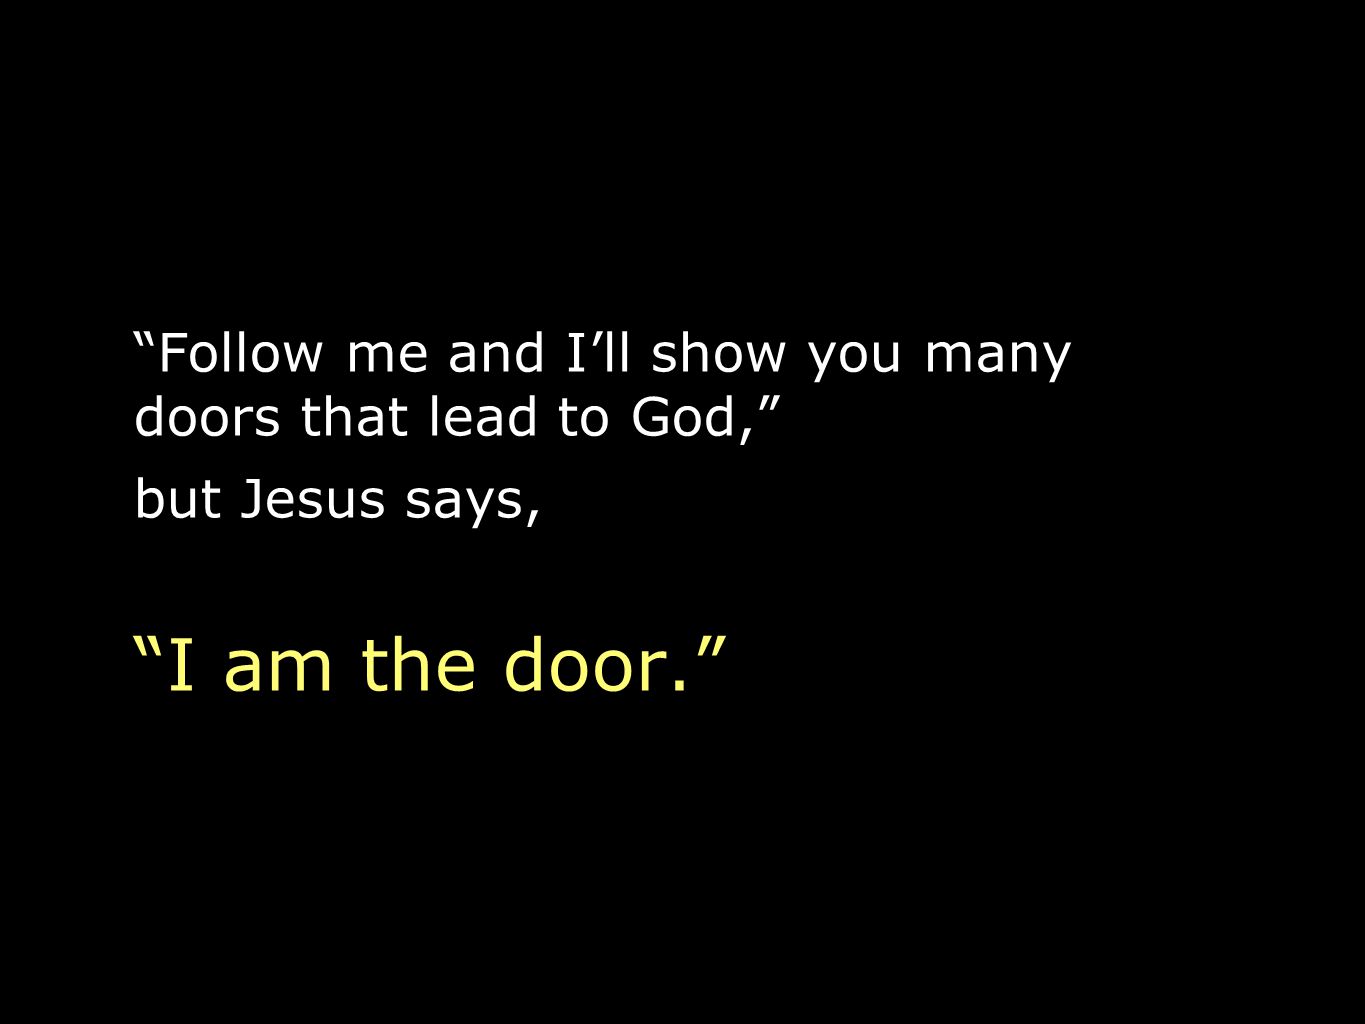 Follow me and I’ll show you many doors that lead to God, but Jesus says,